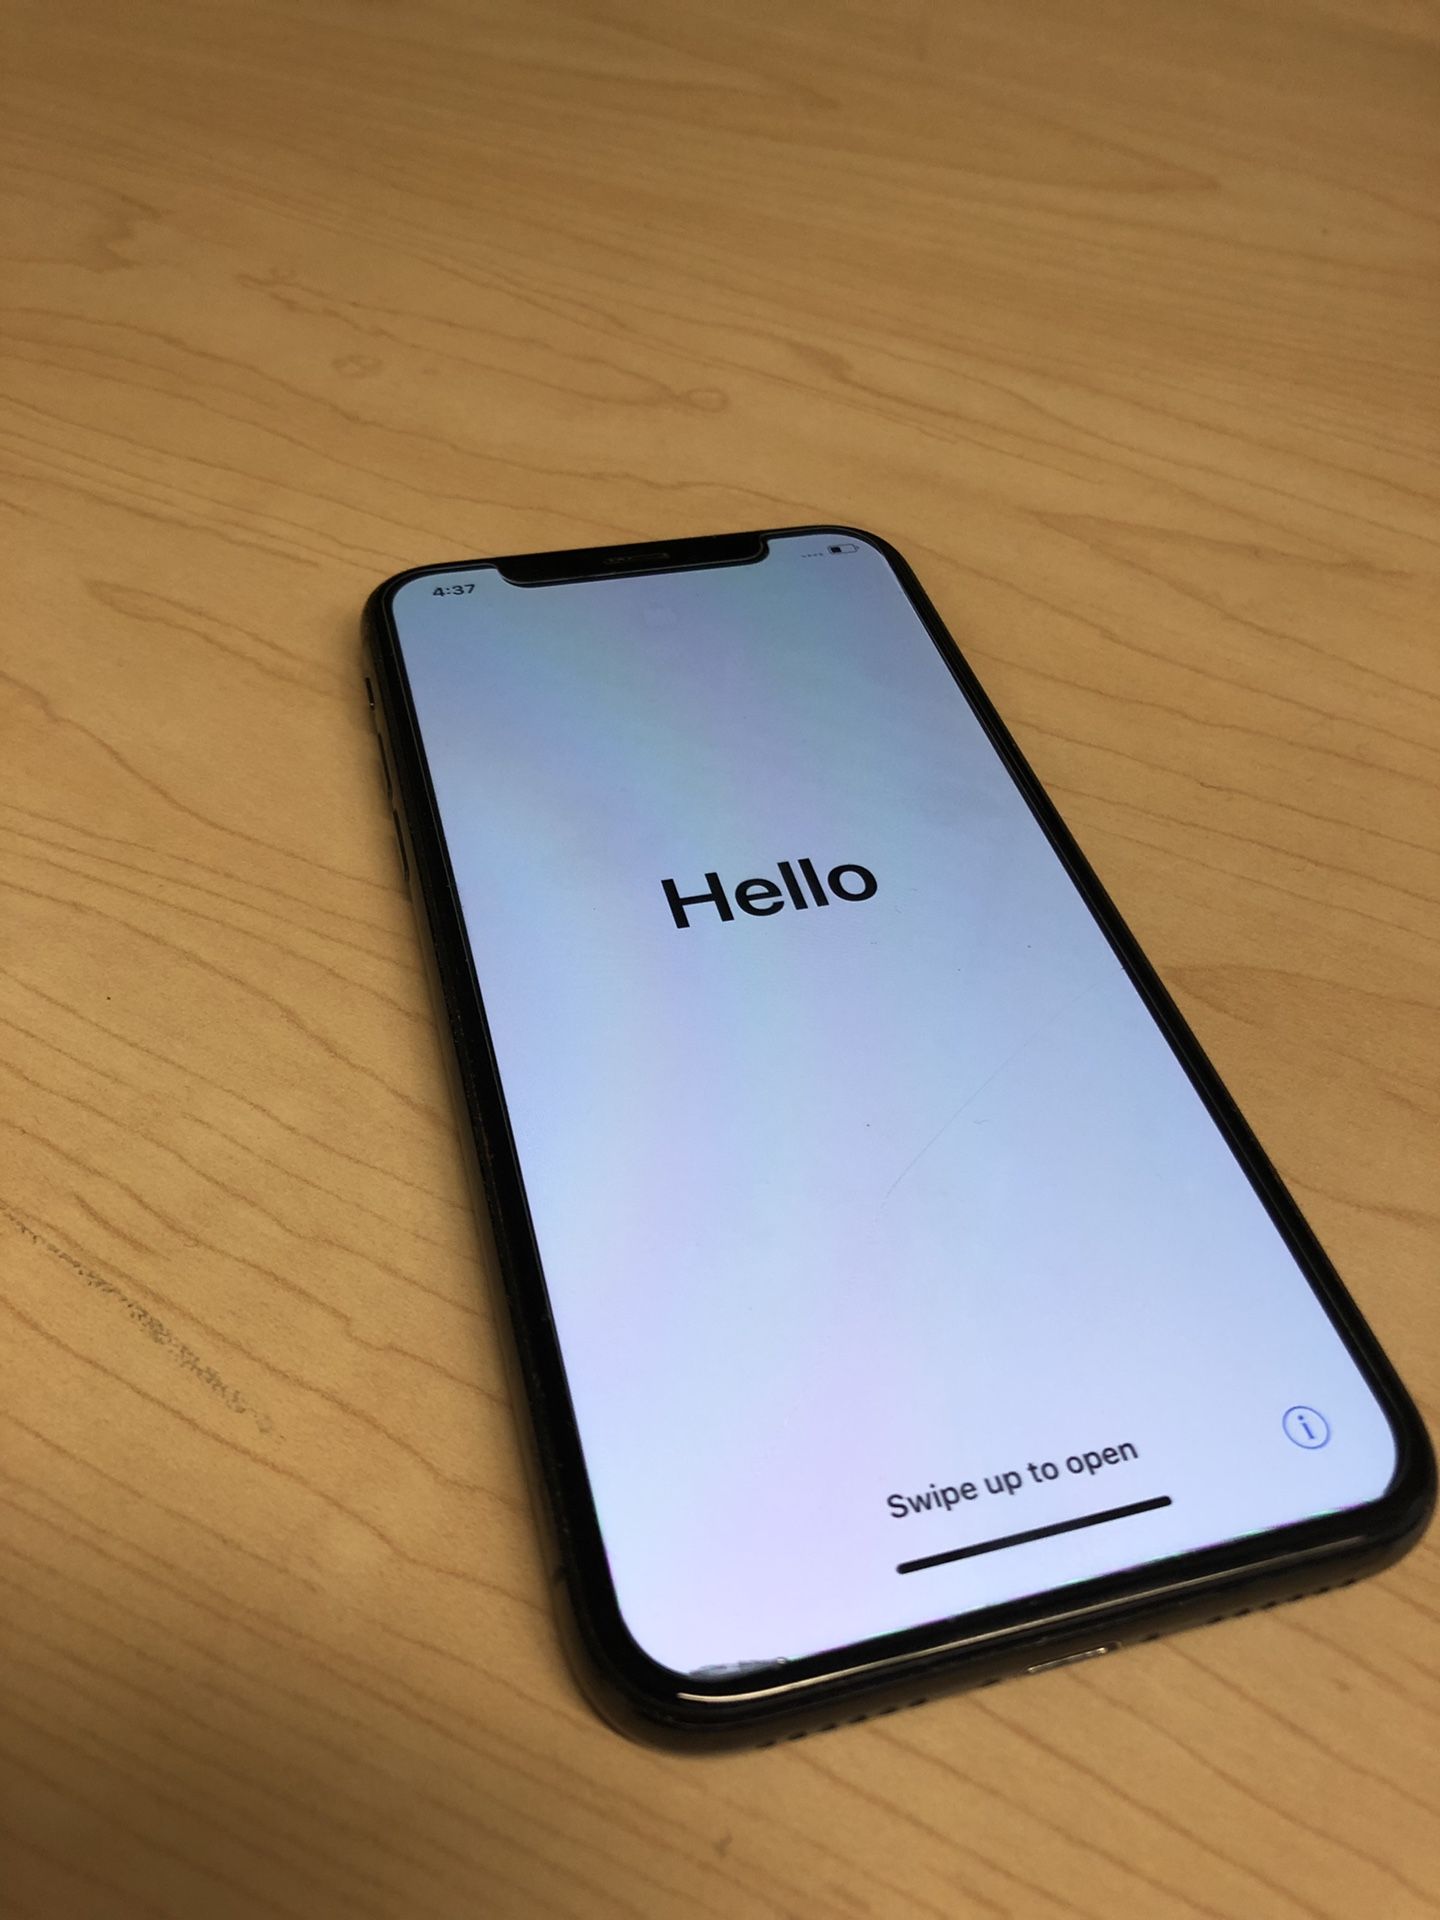 iPhone X 256GB unlocked. No scratches on screen or body.